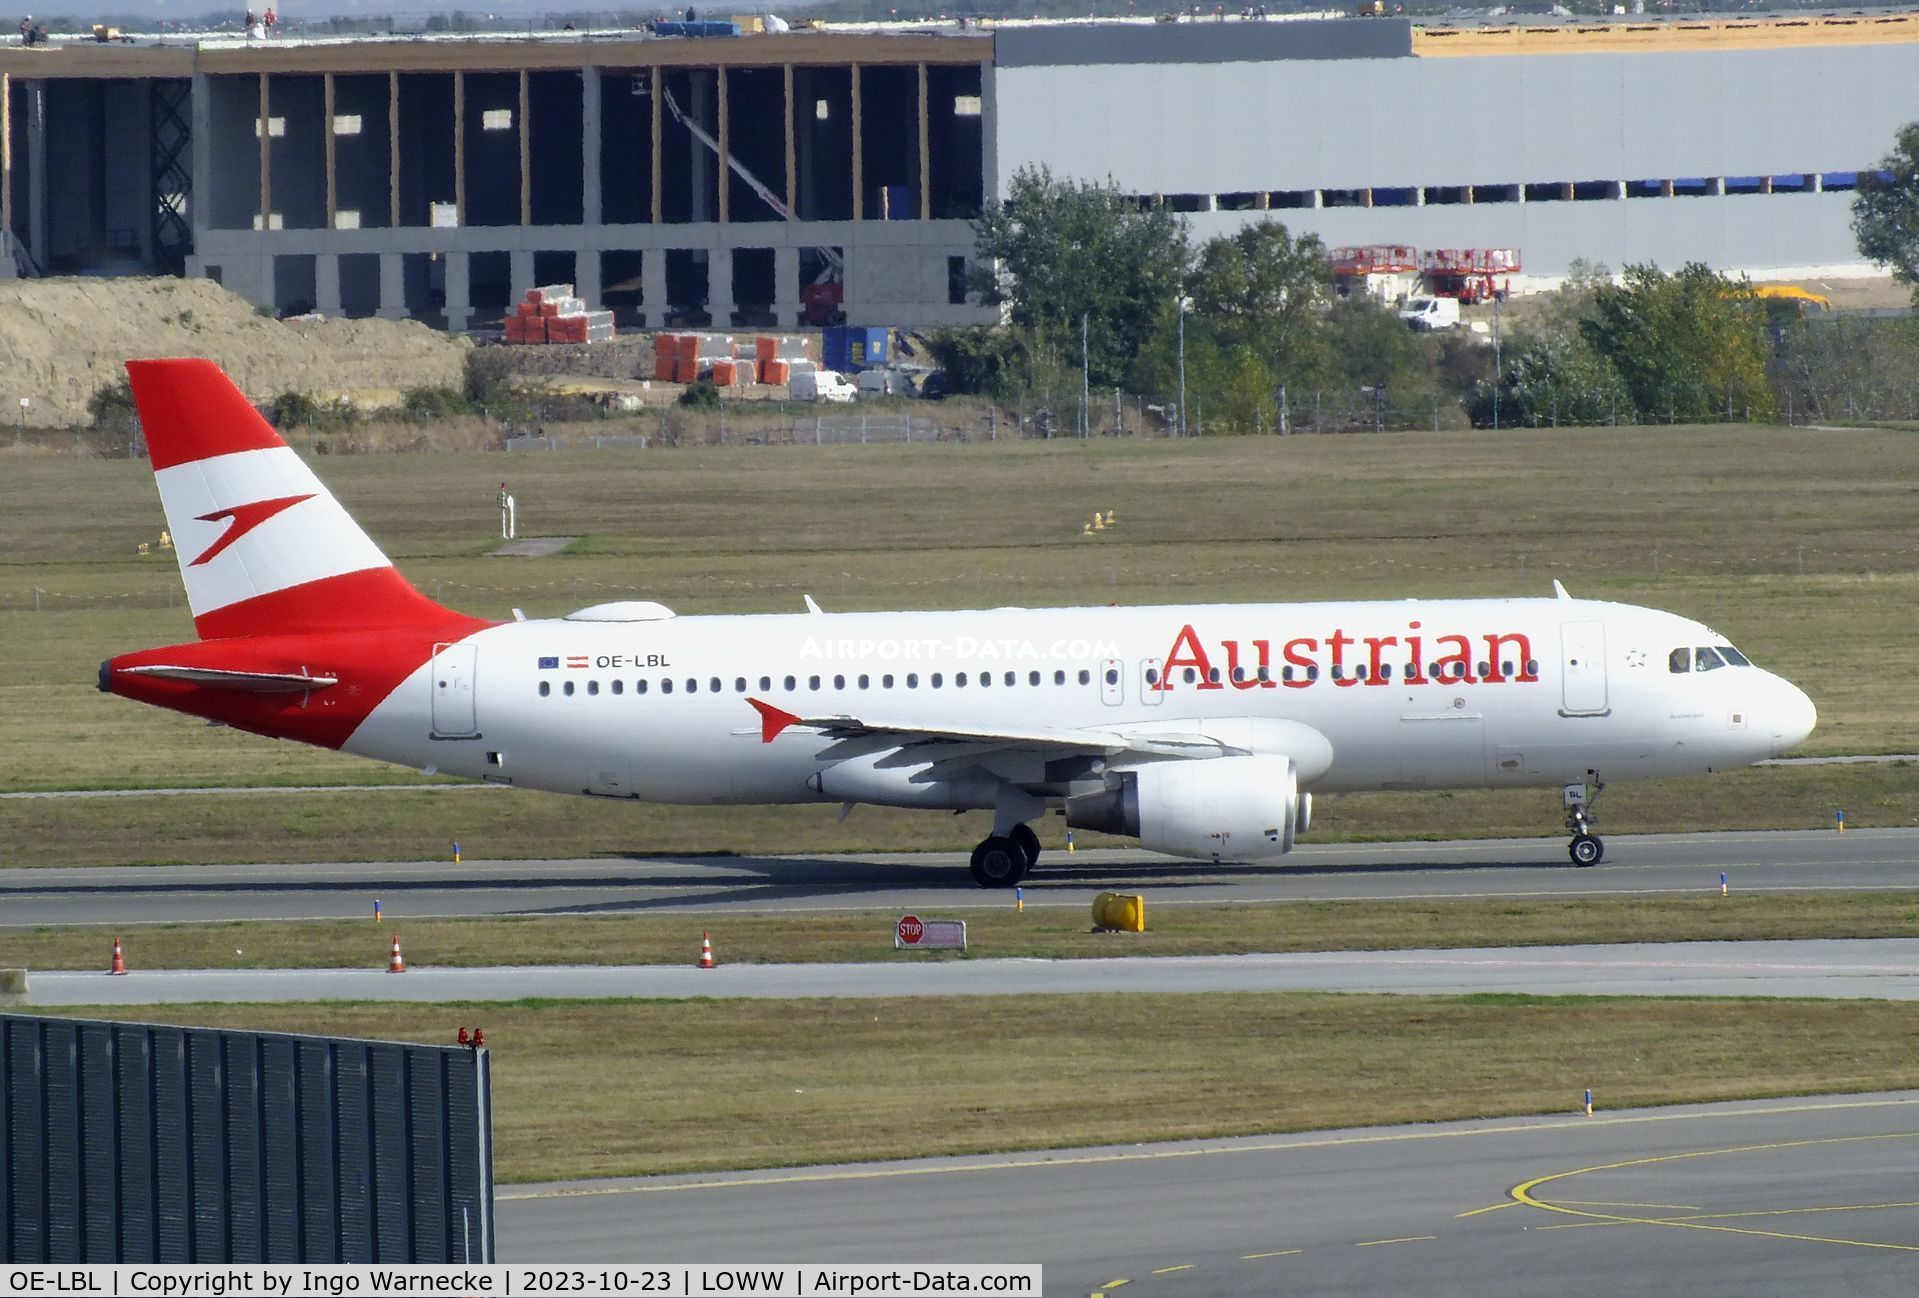 OE-LBL, 2003 Airbus A320-214 C/N 2009, Airbus A320-214 of Austrian Airlines at Wien-Schwechat airport